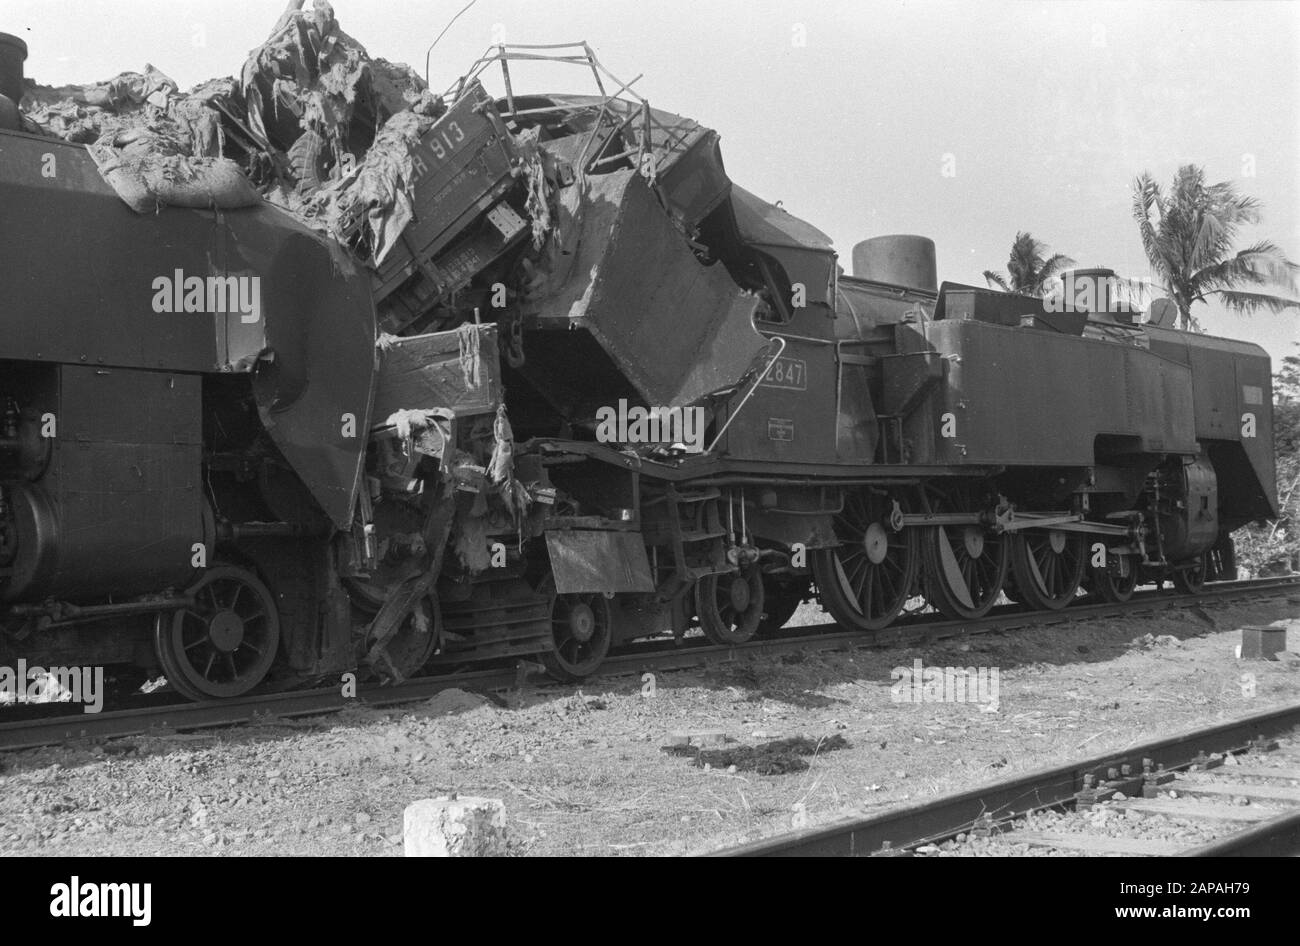 Train collision near the bridge in Krantji, group at Tjikampek Description: Batavia-sector 24/7. locomotive released on a train, which accompanied the advancing troops. Personal accidents did not occur, as the wild locomotive was detected in time and everyone had jumped off the train. Date: 24 July 1947 Location: Indonesia, Java, Dutch East Indies Stock Photo